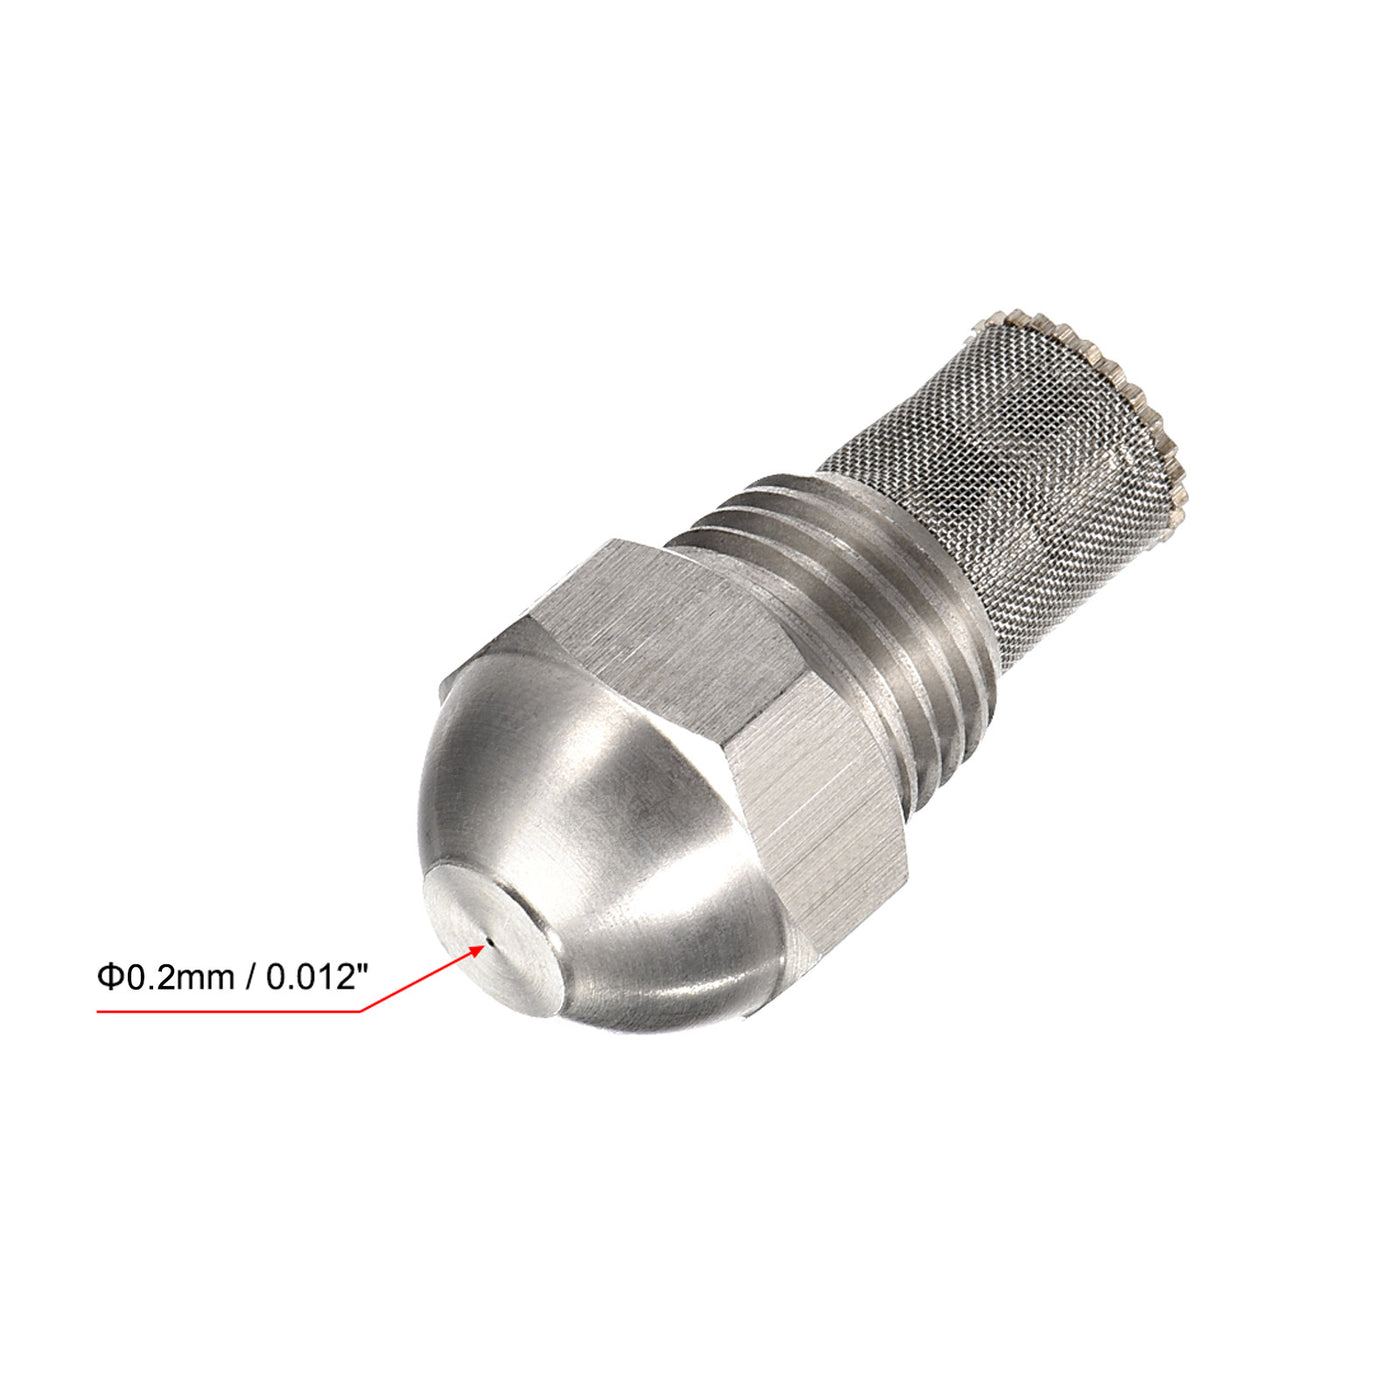 Uxcell Uxcell Mist Nozzle - 1/4BSPT 0.2mm Orifice Dia 304 Stainless Steel Fine Atomizing Spray Tip